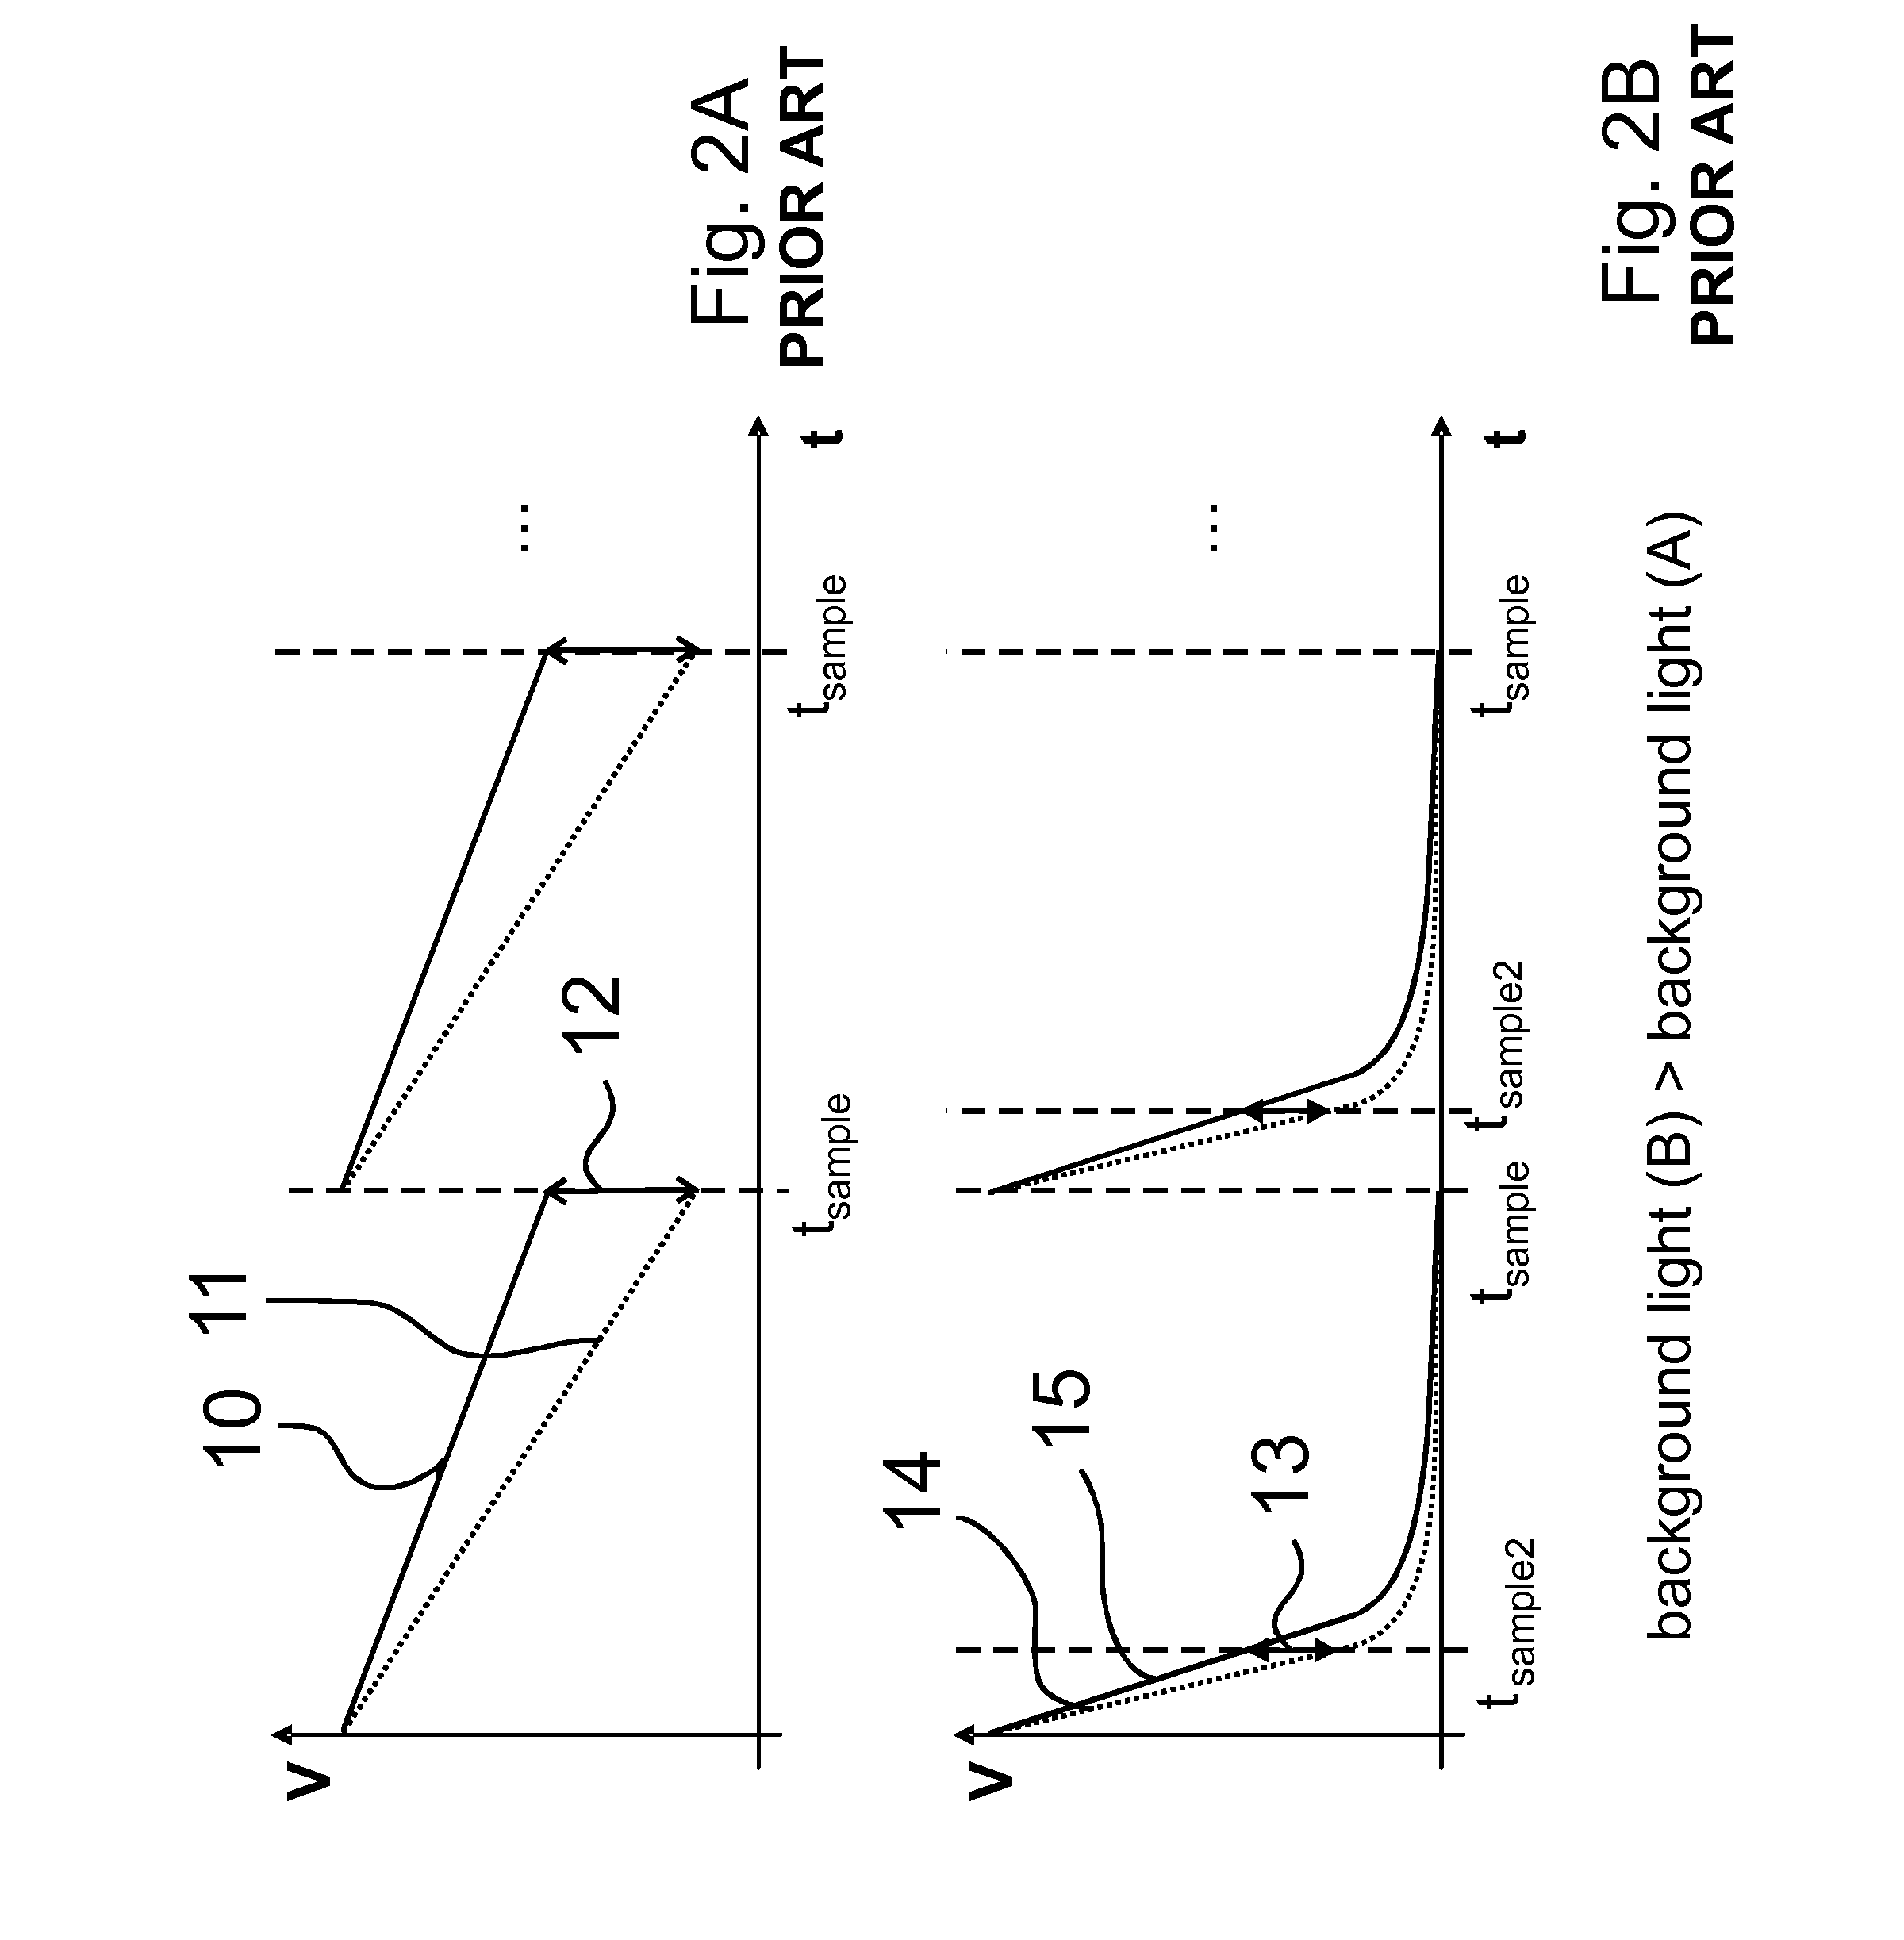 TOF Range Finding With Background Radiation Suppression